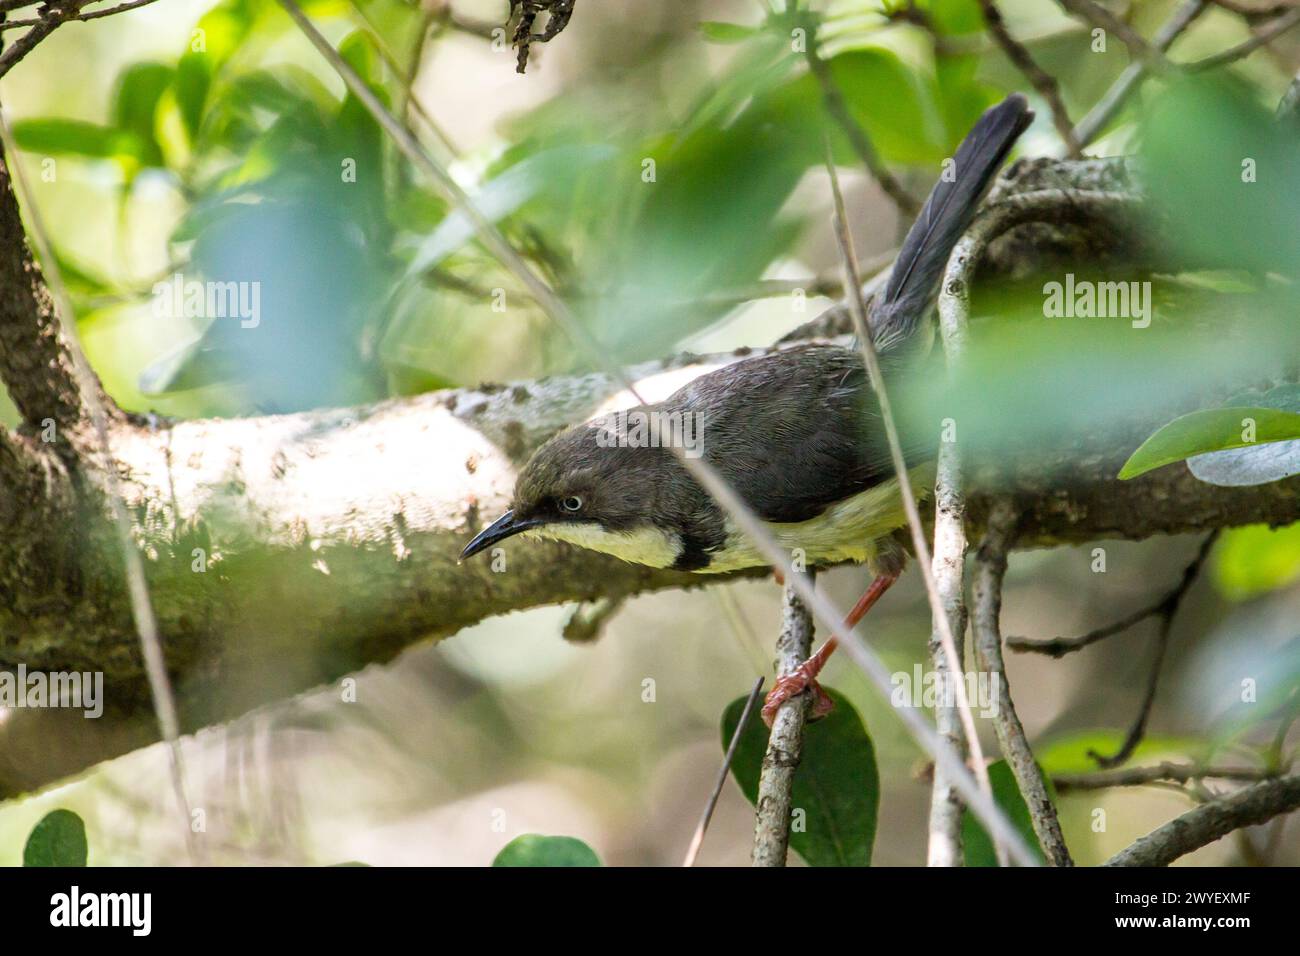 A small bar-throated Apalix, Apalis thoracica, between the branches of a tree in the afro temperate forests of the Witwatersrand Botanical Gardens of Stock Photo